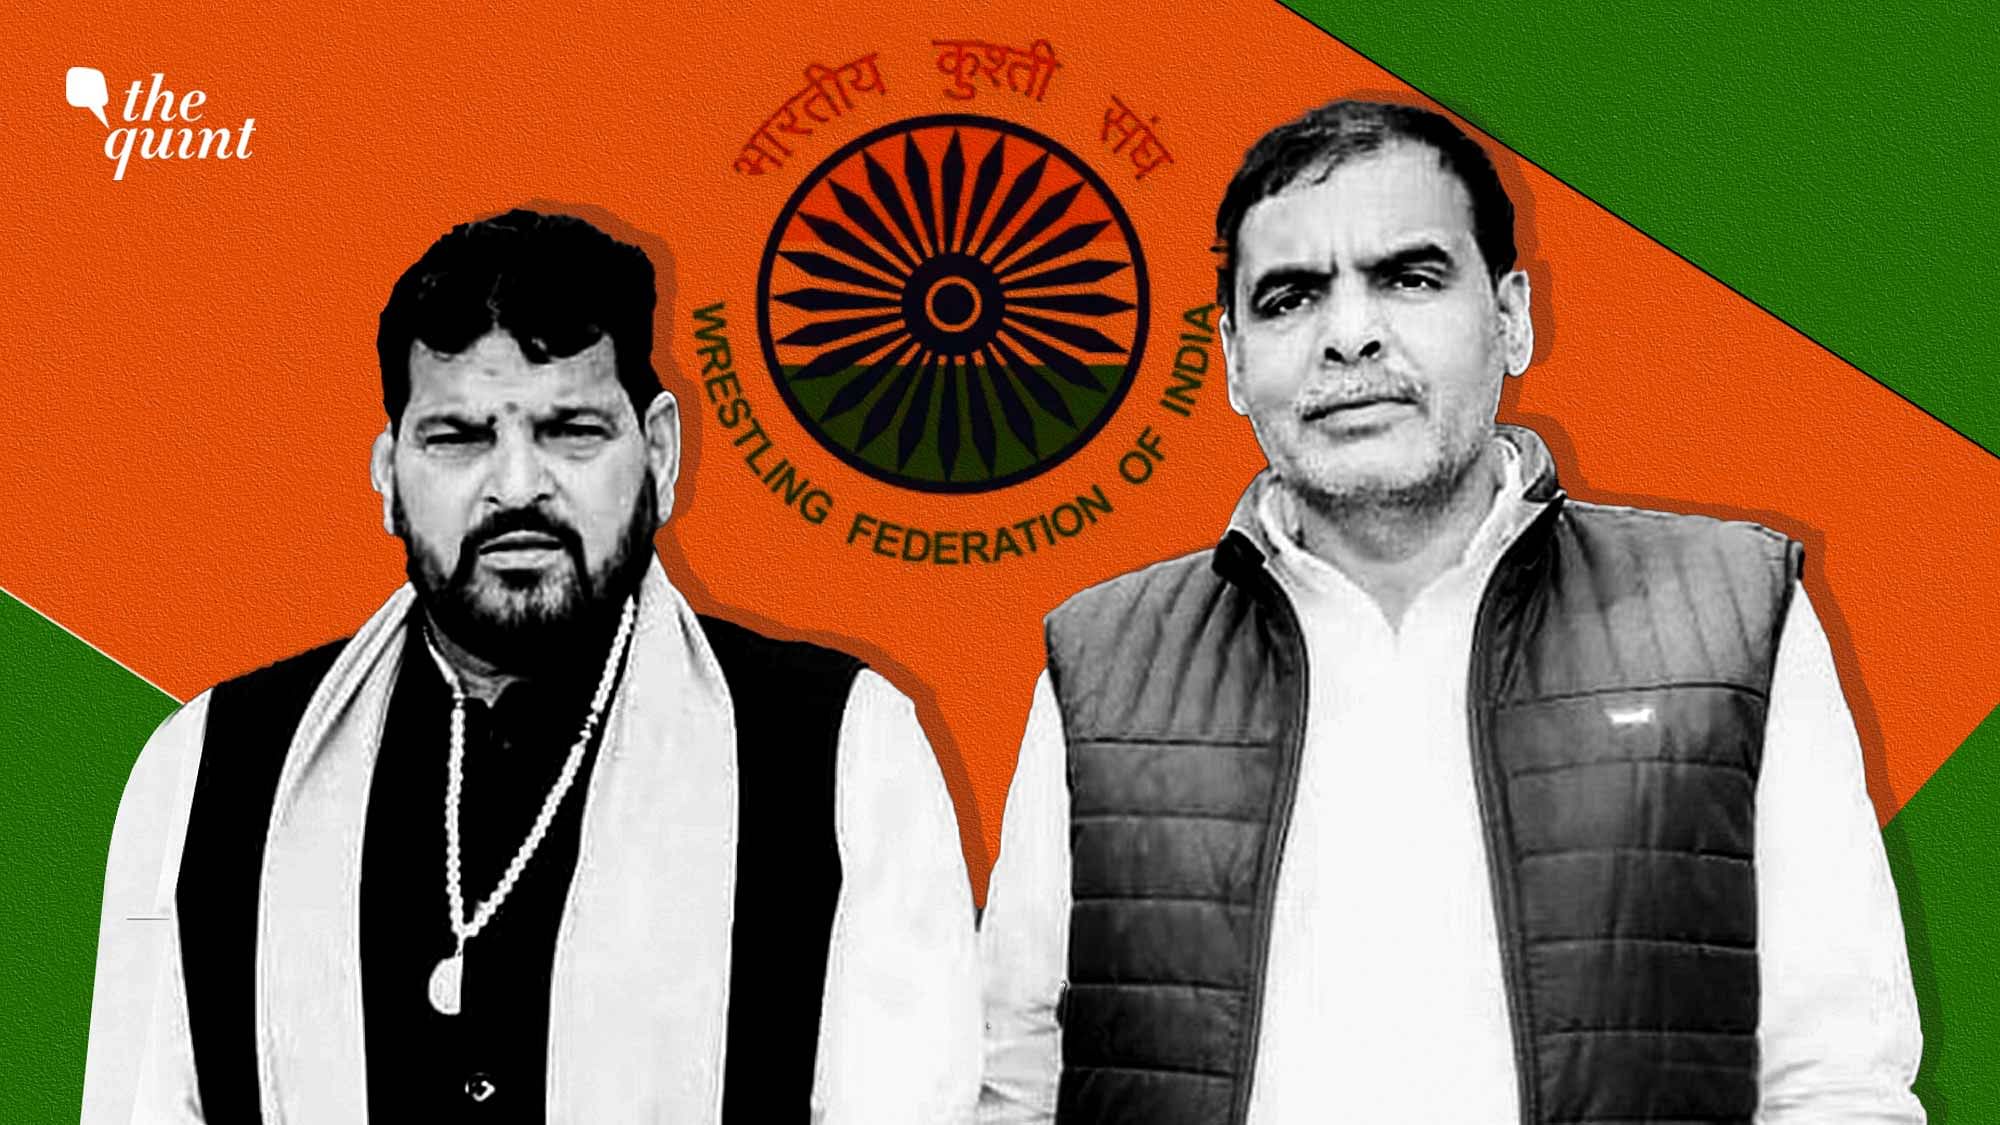 <div class="paragraphs"><p>The Wrestling Federation of India’s (WFI) newly-elected body was <a href="https://www.thequint.com/sports/wrestling/sports-ministry-suspends-new-wfi-body-sanjay-singh-brij-bhushan-sharan-singh">suspended</a> on Sunday by the Sports Ministry, citing the fact that the “newly elected body appears to be in complete control of former office-bearers.”</p></div>